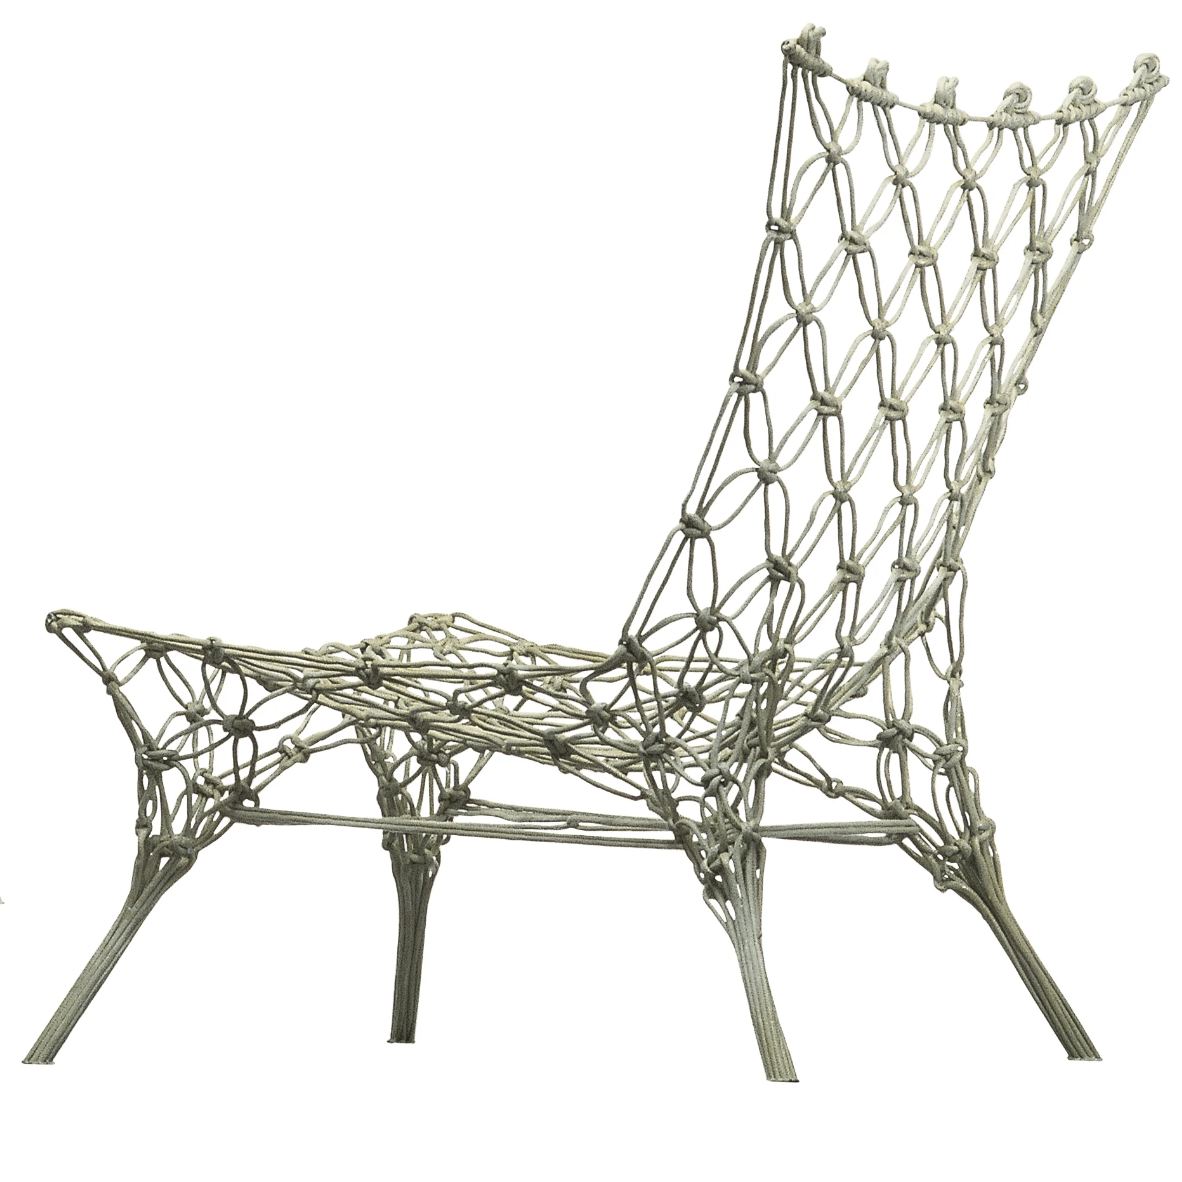 Photo knotted chair